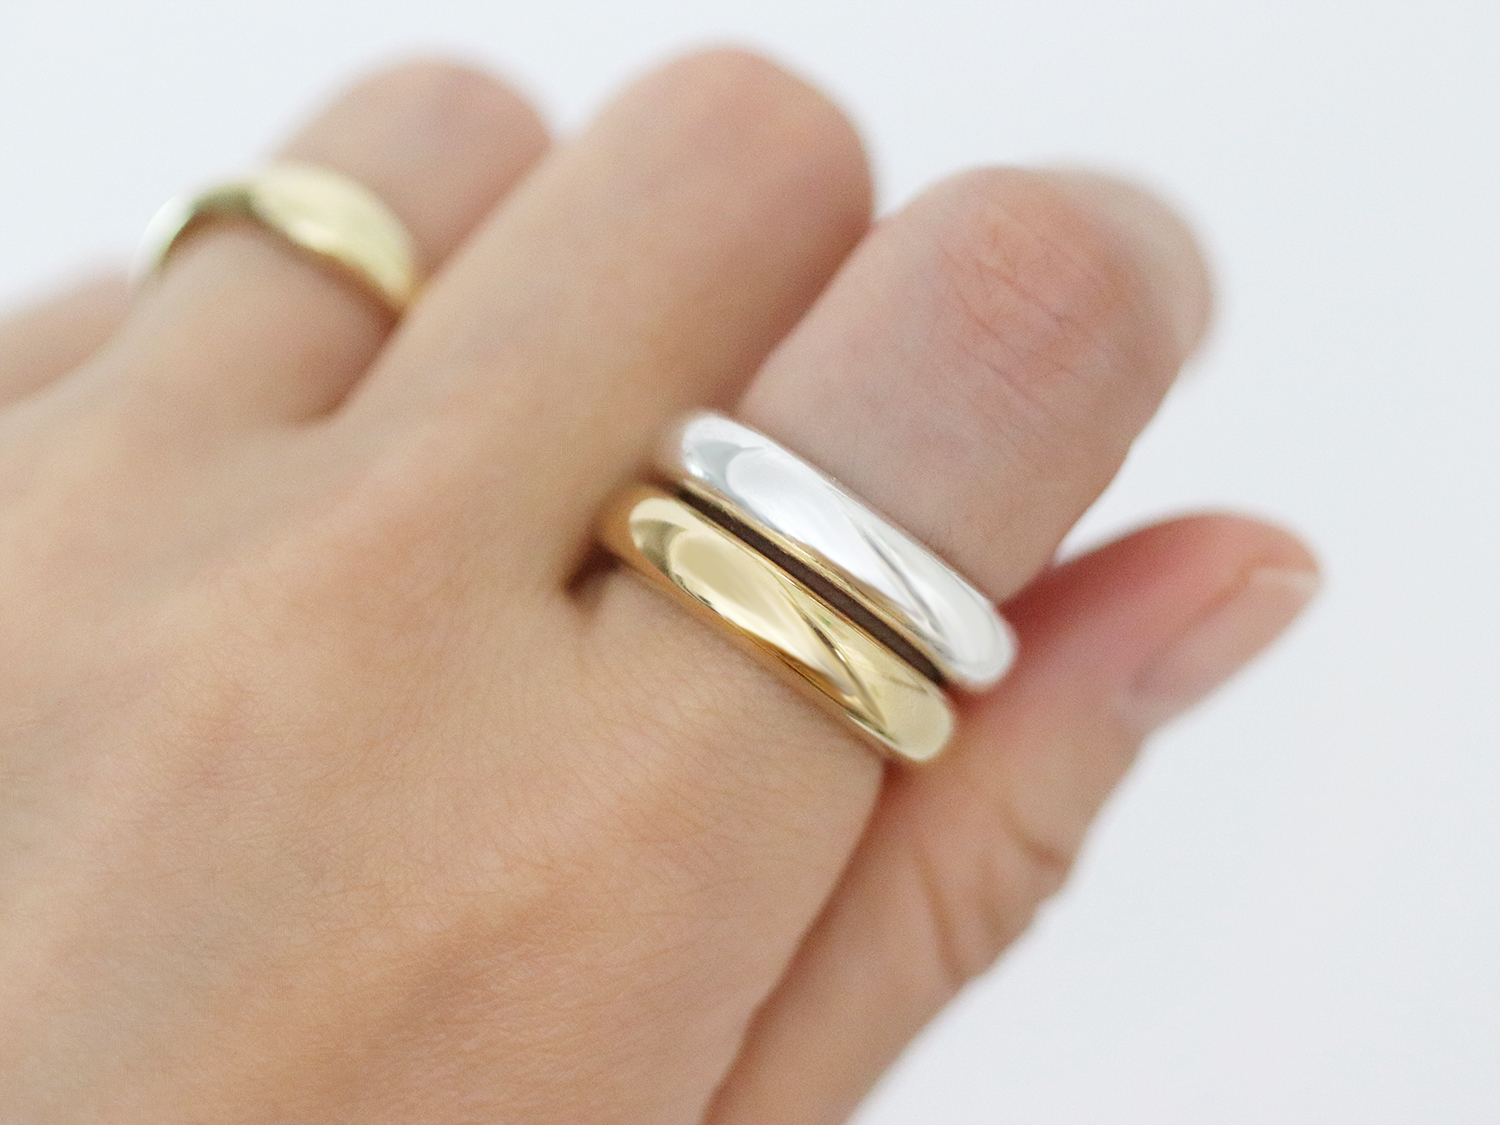 silver and gold band